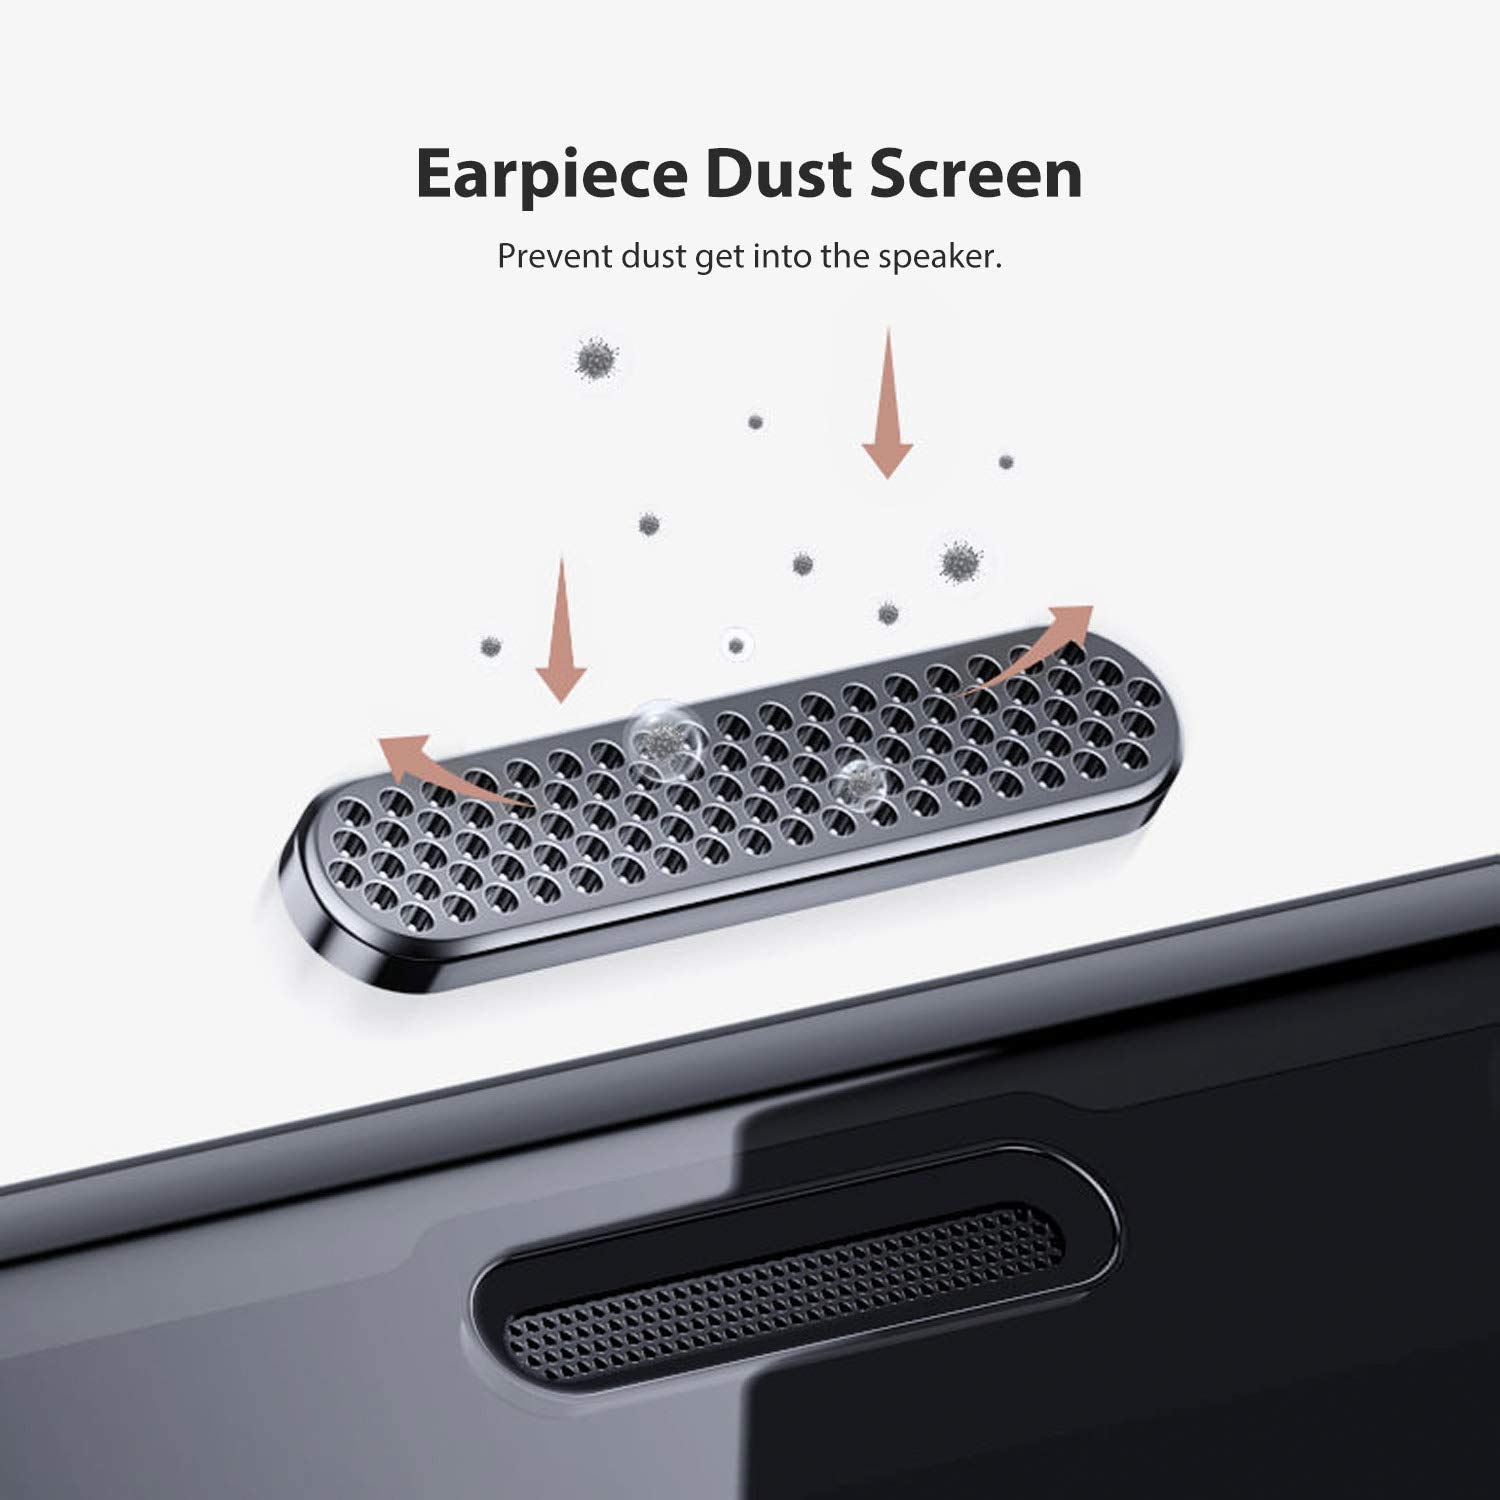 iCruze iPhone Tempered Glass for iPhone 11 - iCruze